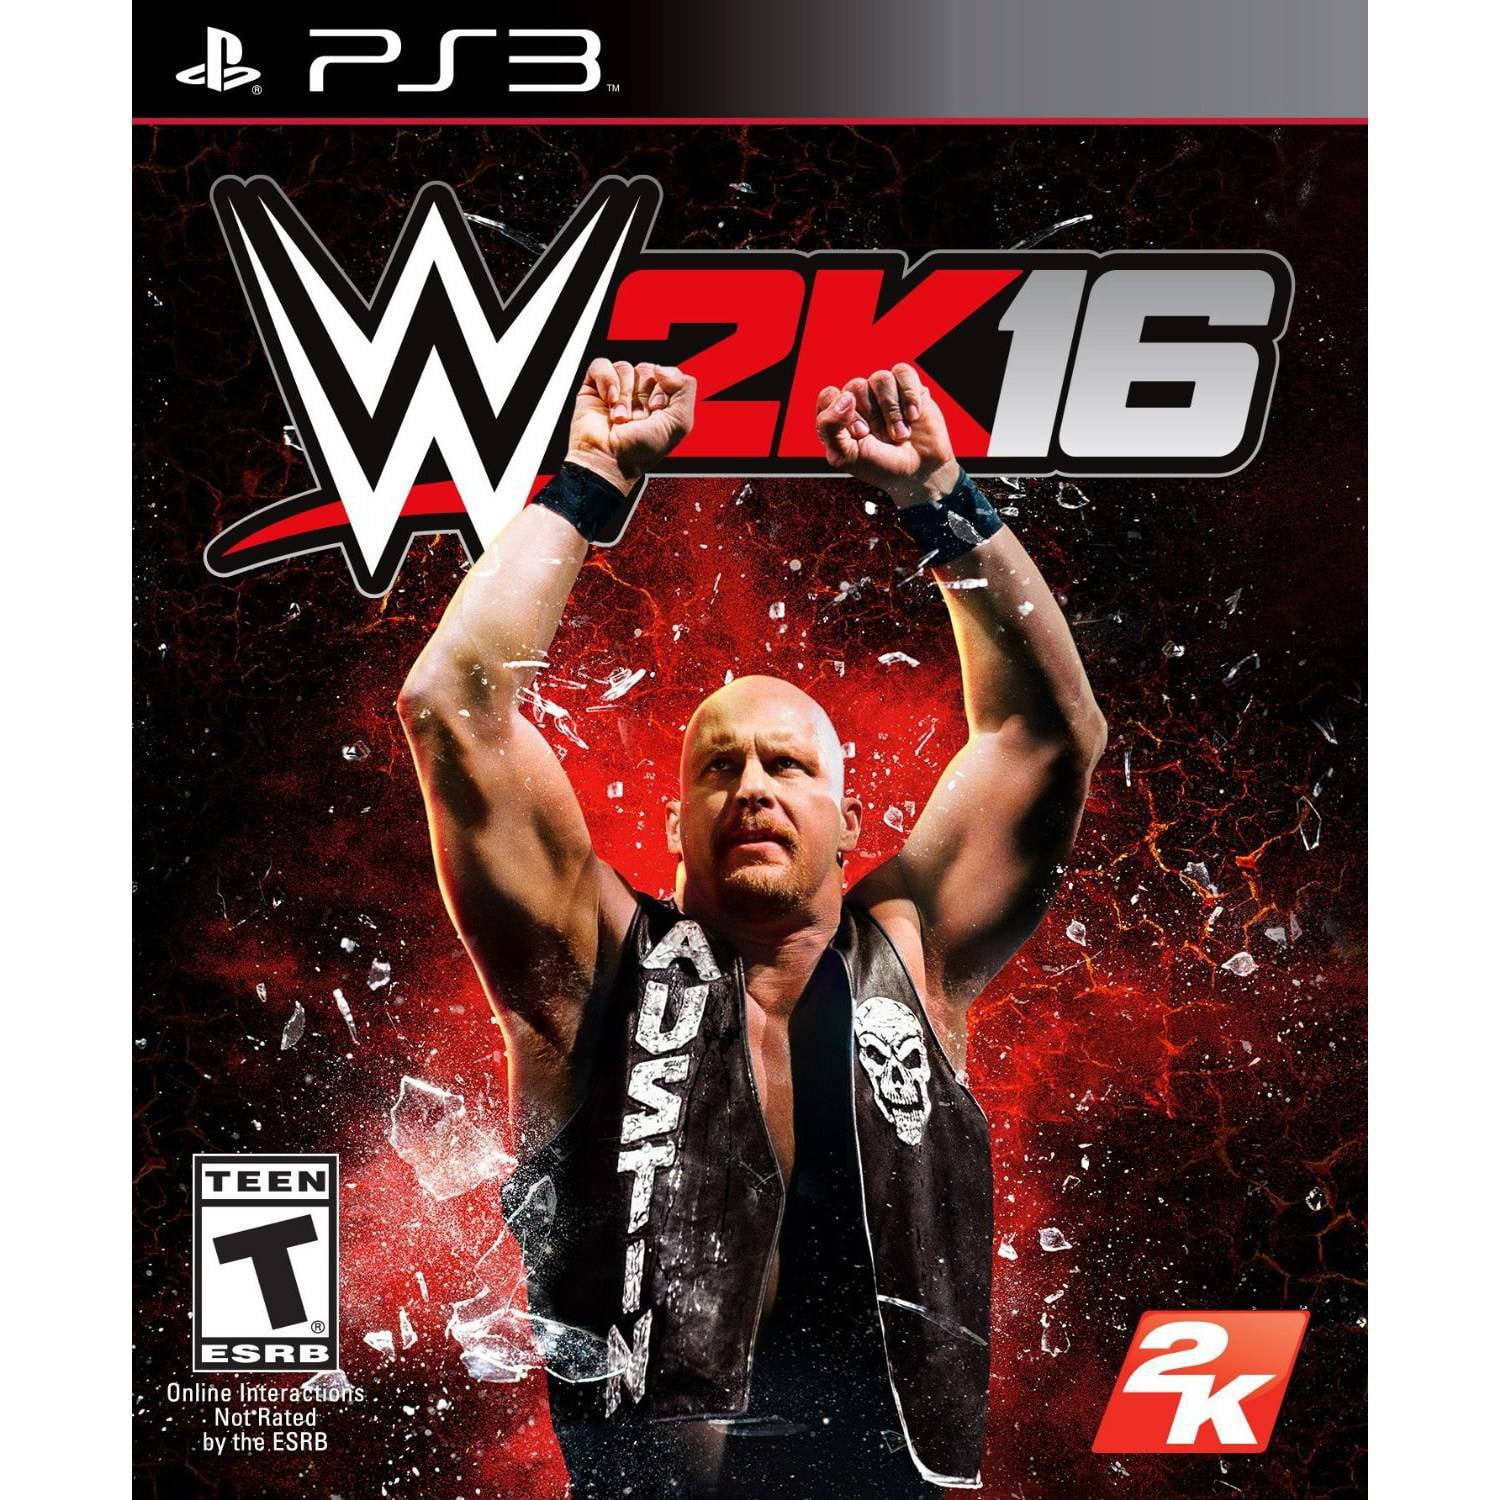 wwe 2k17 ps3 for sale